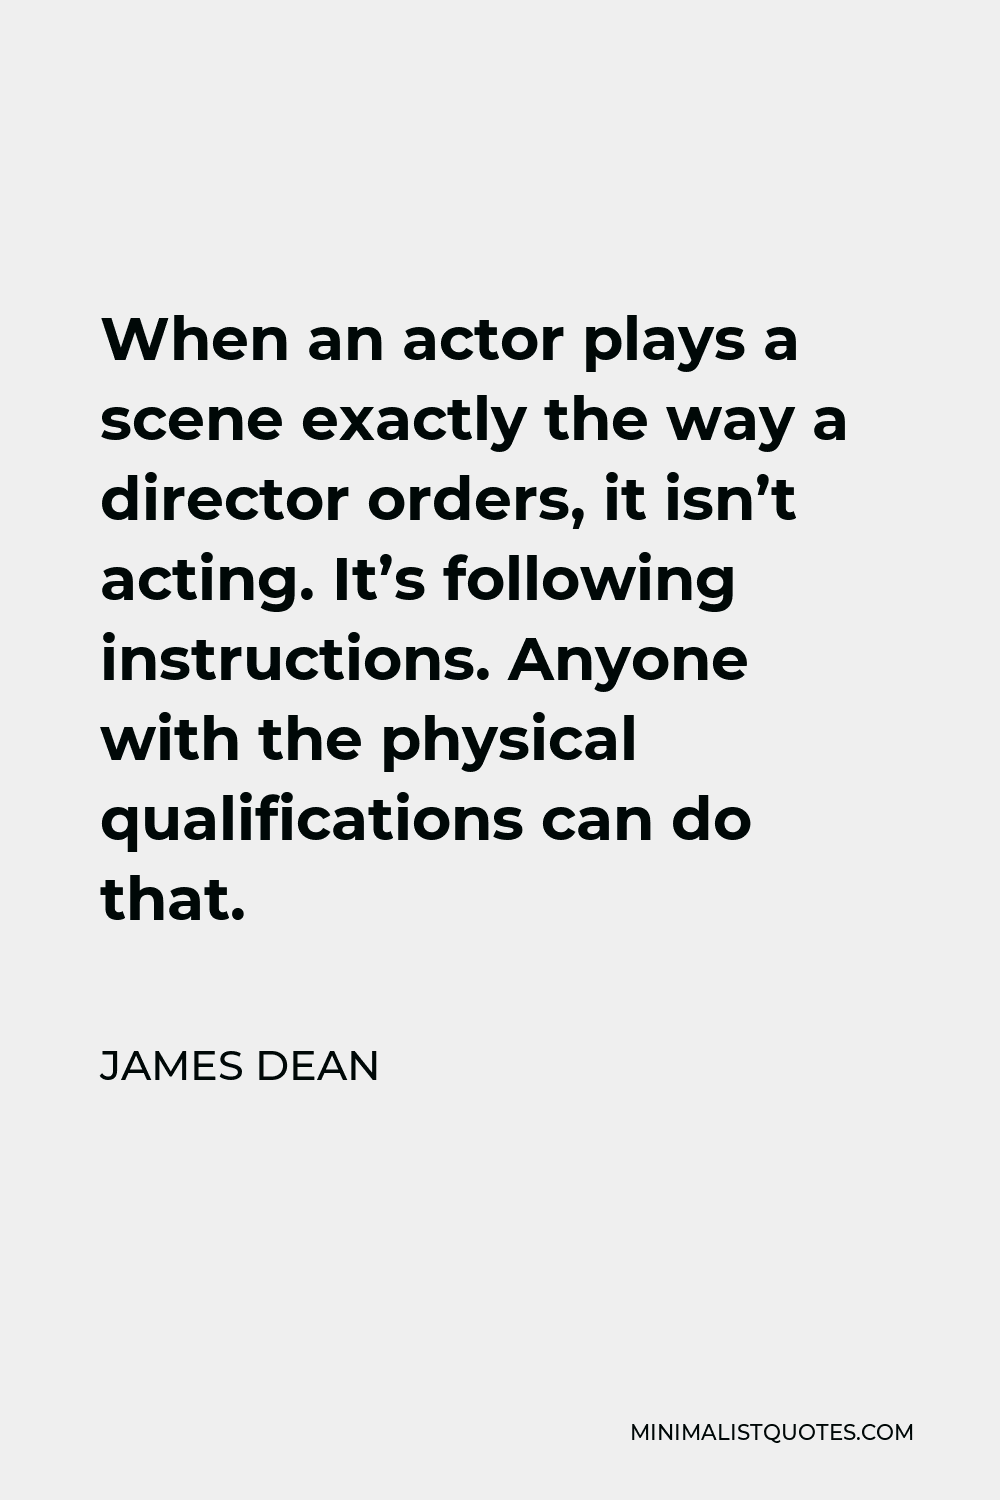 James Dean Quote - When an actor plays a scene exactly the way a director orders, it isn’t acting. It’s following instructions. Anyone with the physical qualifications can do that.